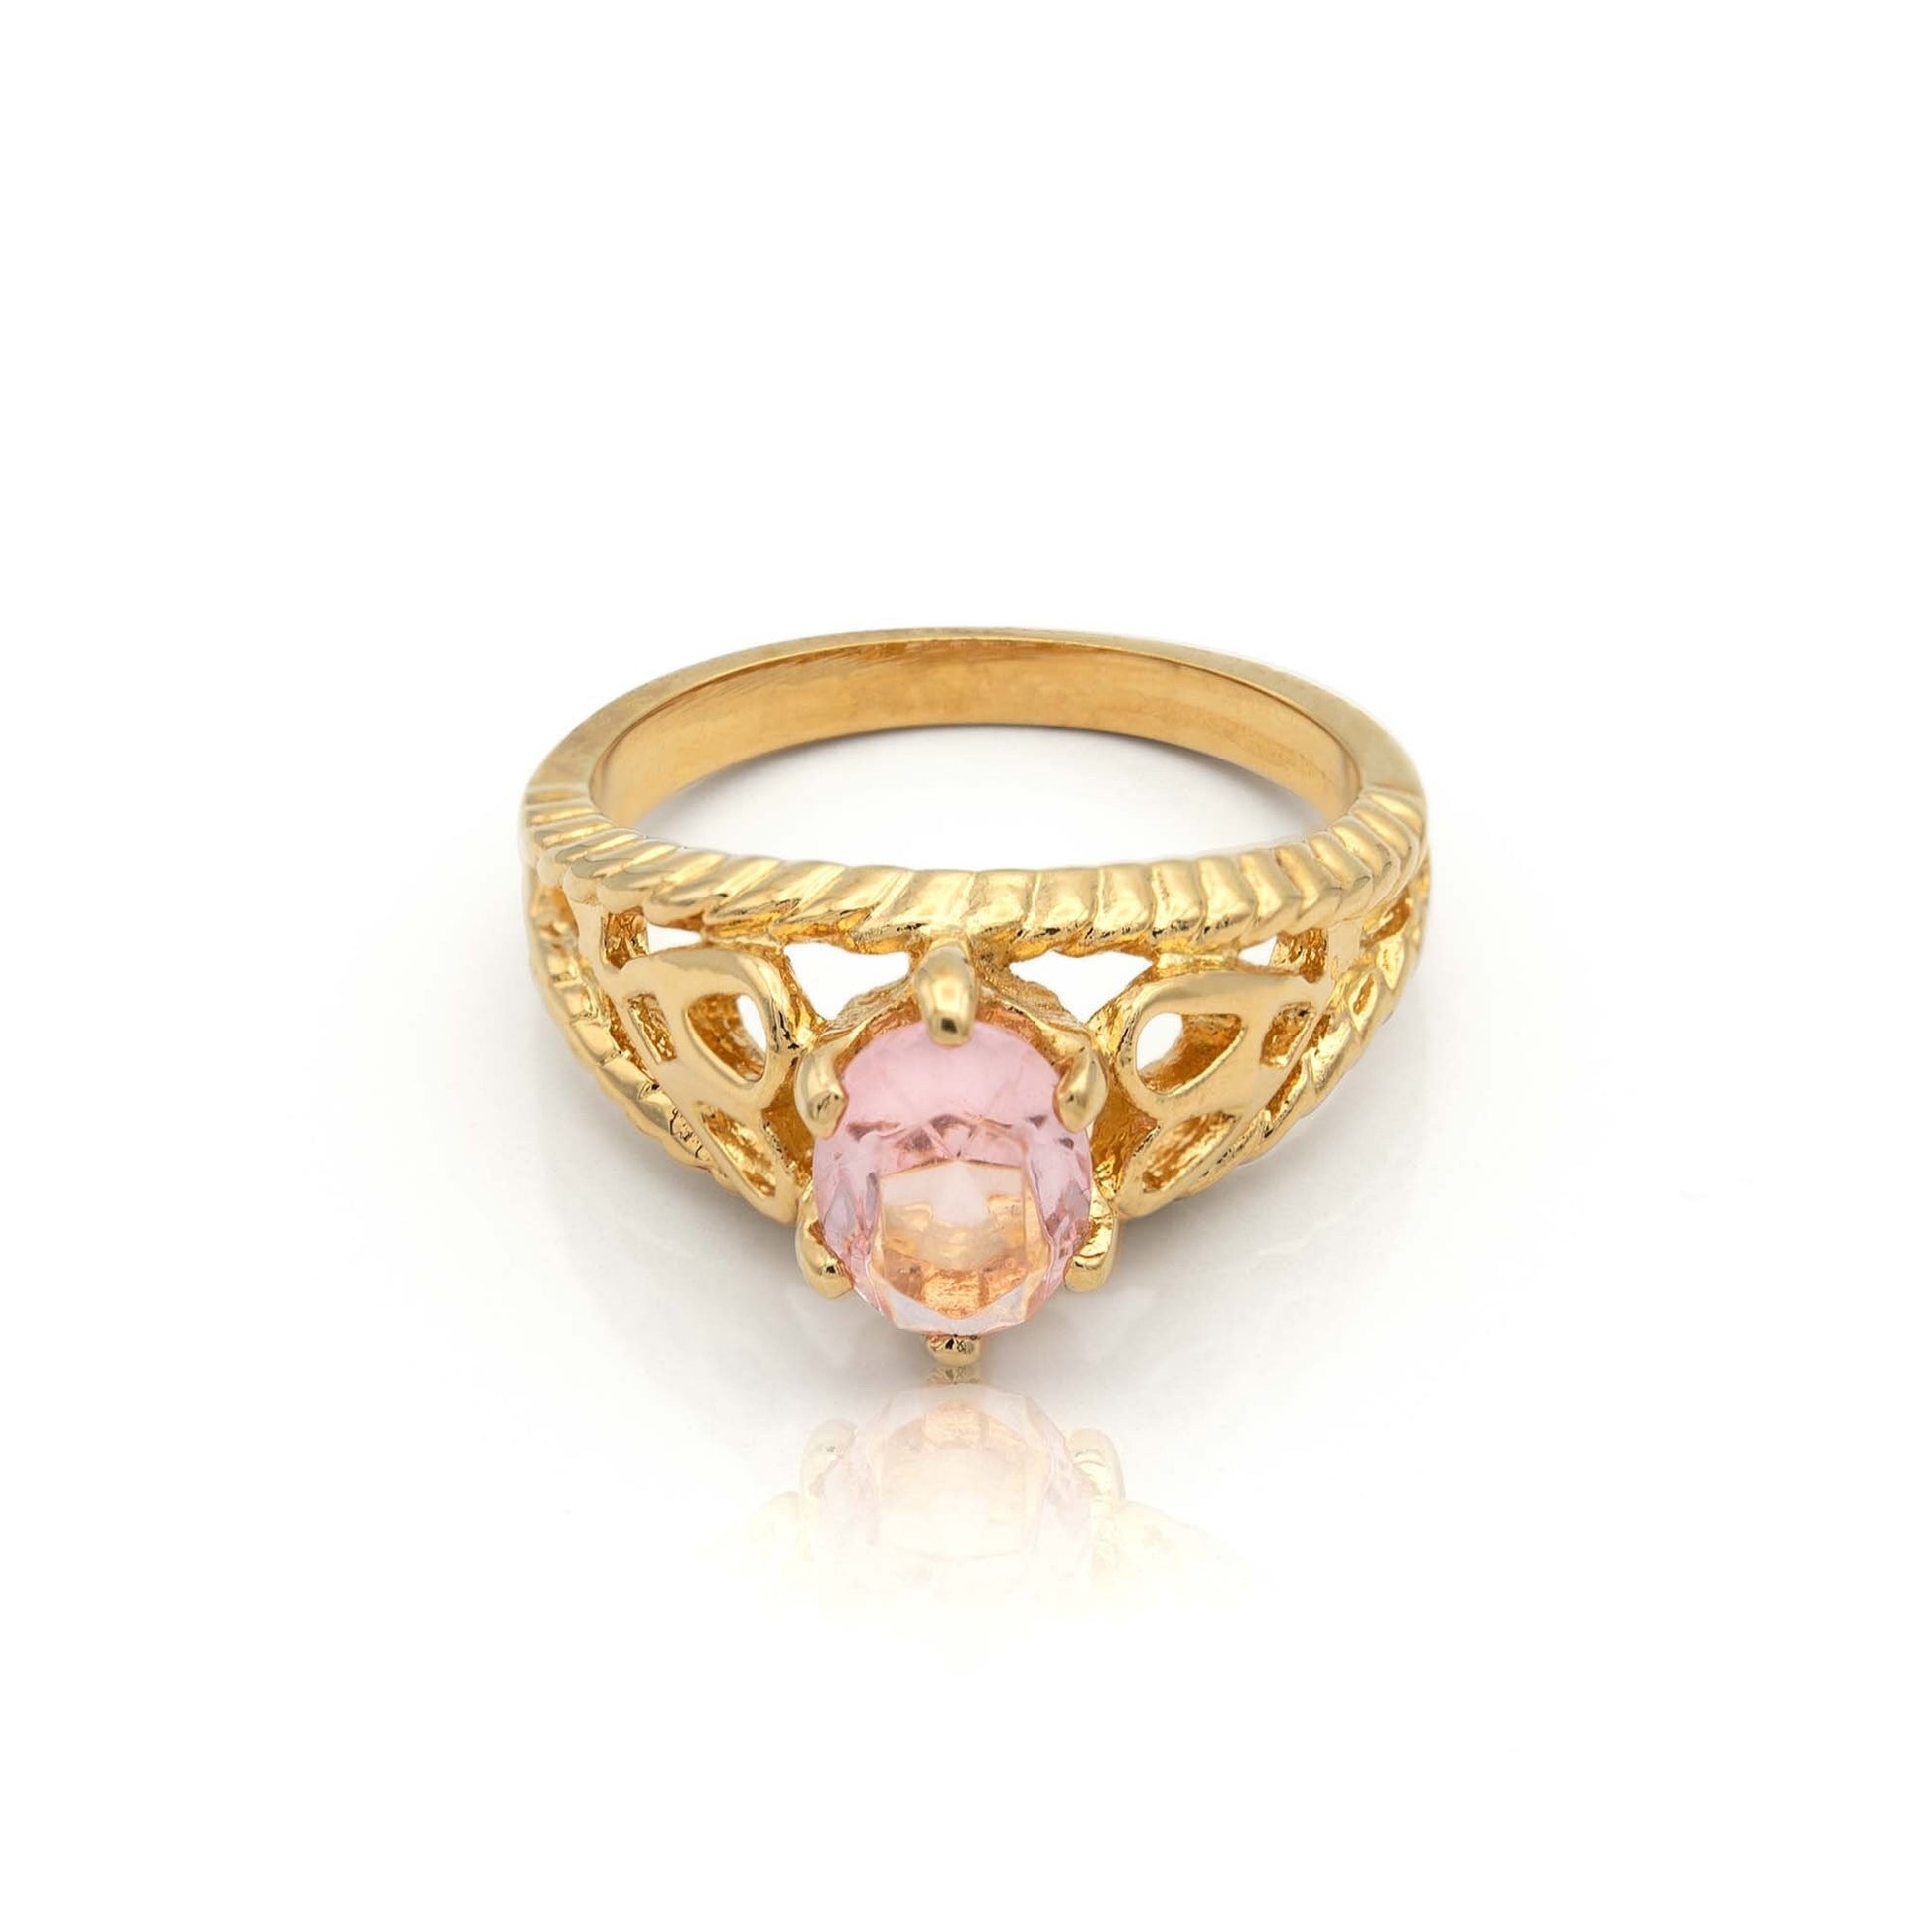 Vintage Ring Opal 18k Gold Filigree Cocktail Ring Antique Womans Jewelry #R300 - Limited Stock - Never Worn